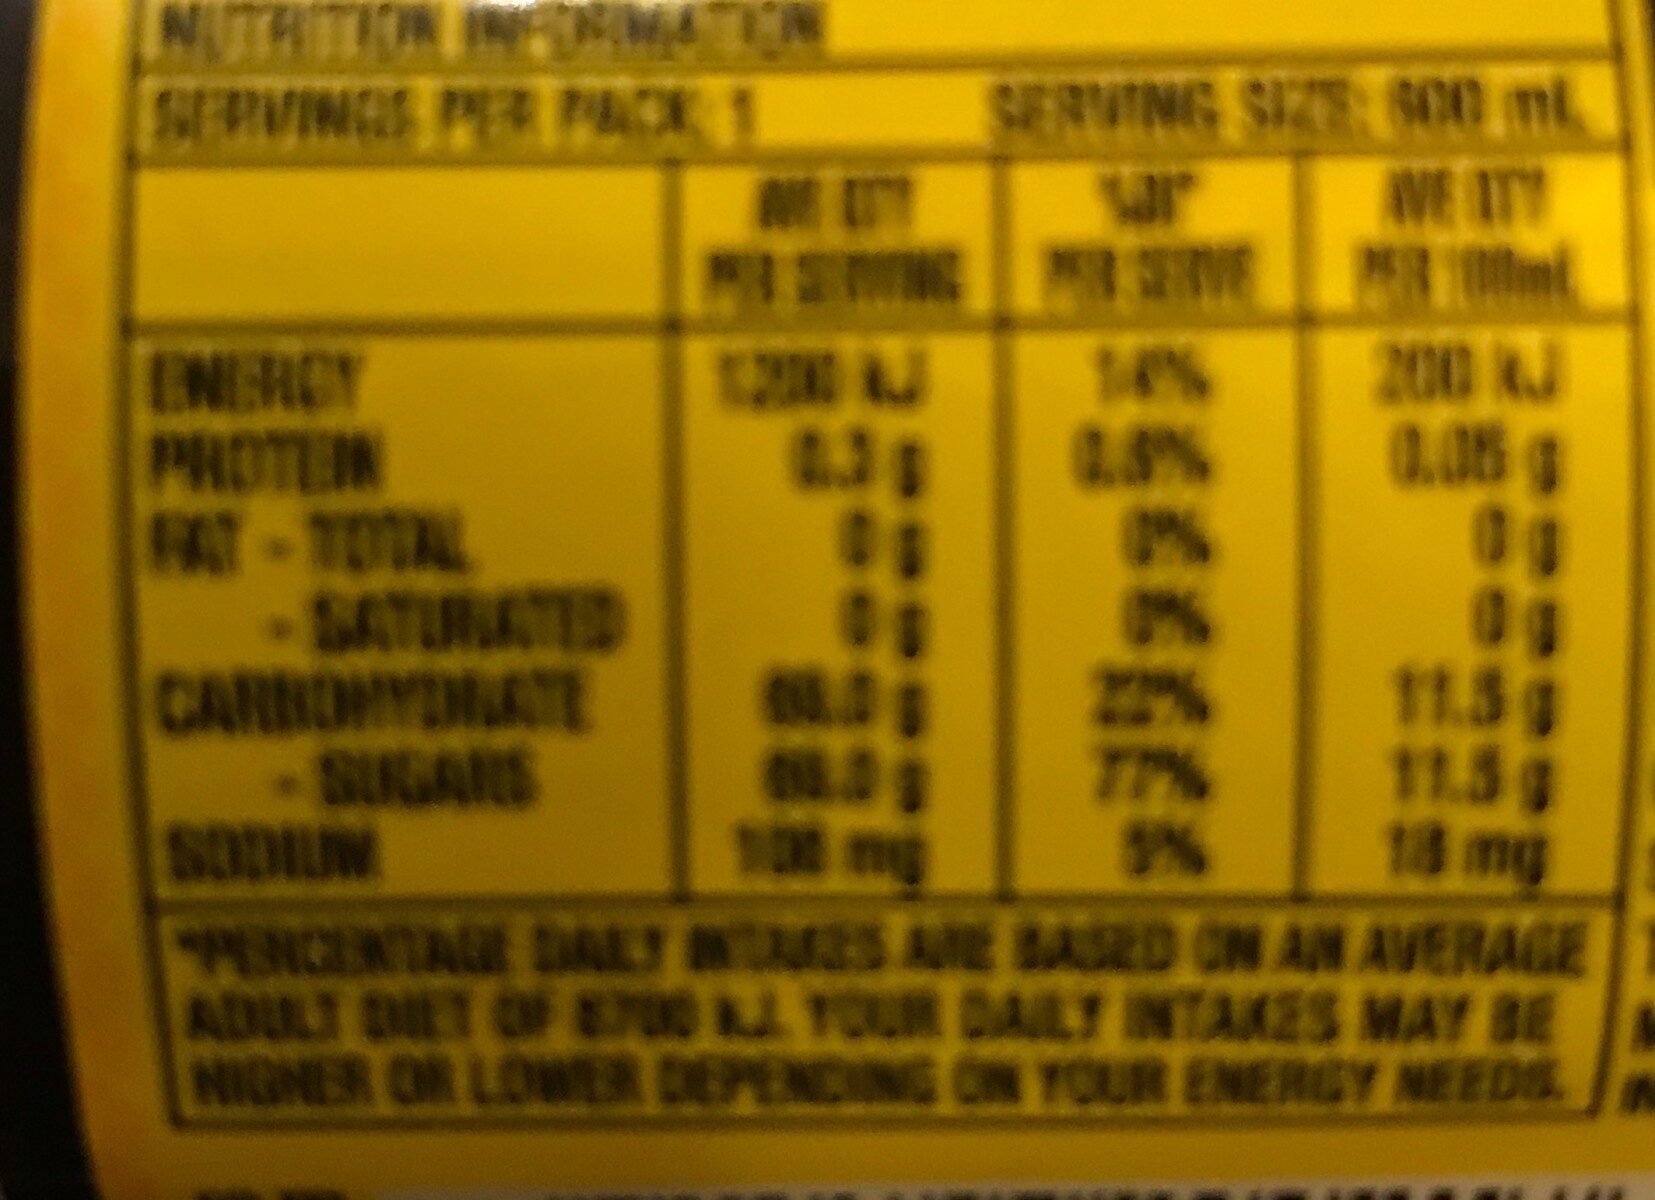 Solo - Nutrition facts